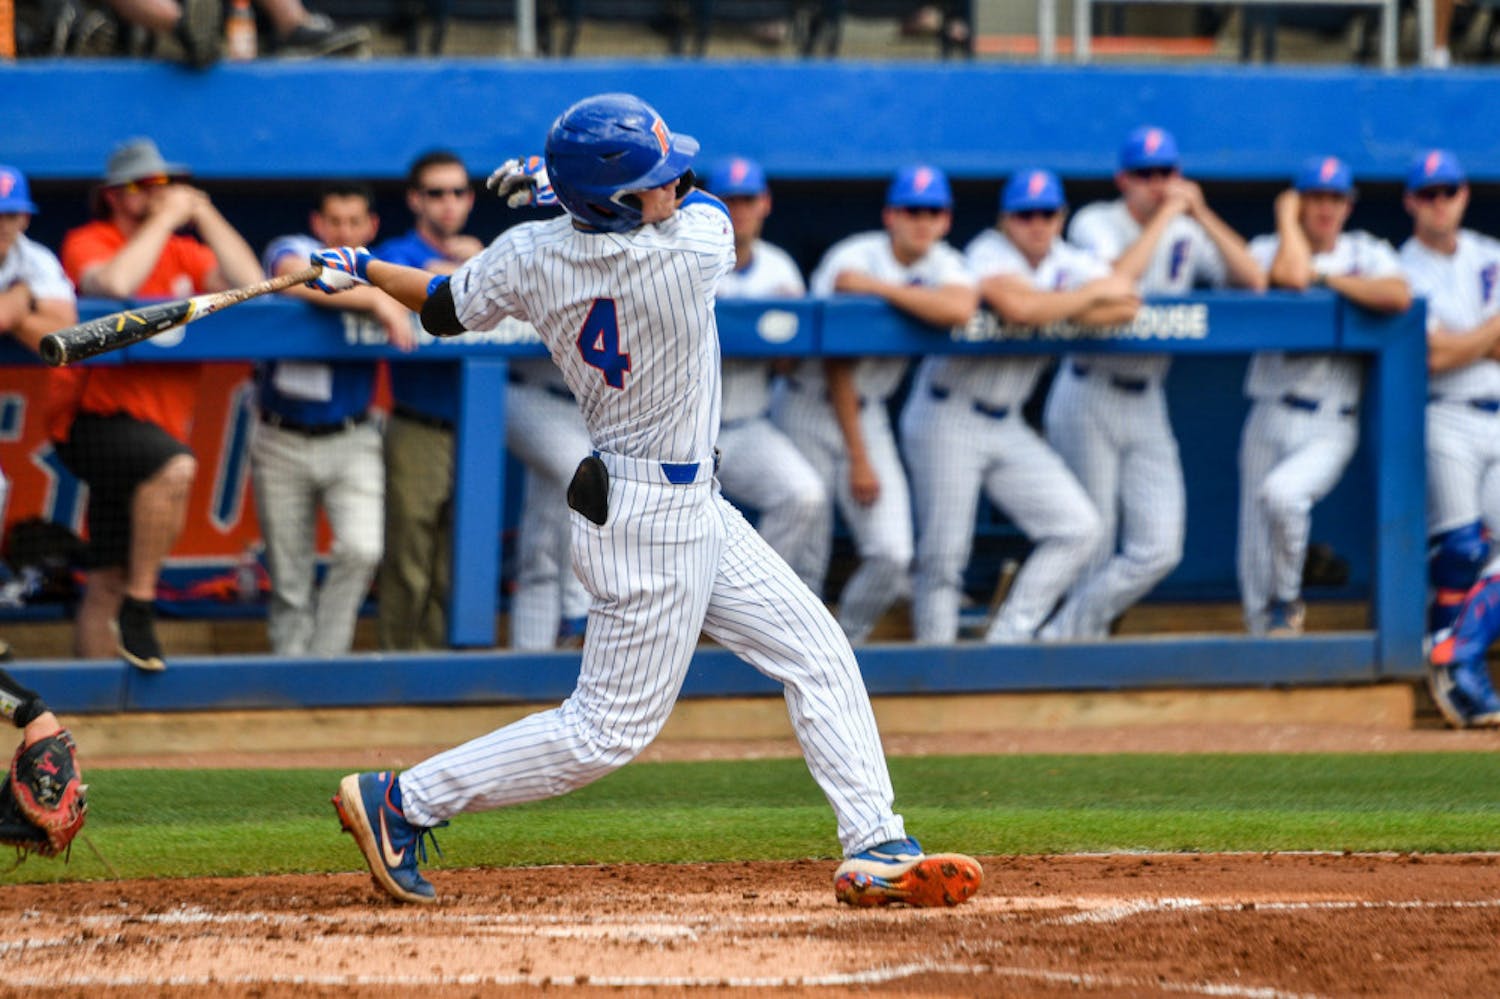 Junior center fielder Jud Fabian knocked his 23rd and 24th home runs of the year Sunday against Oklahoma.